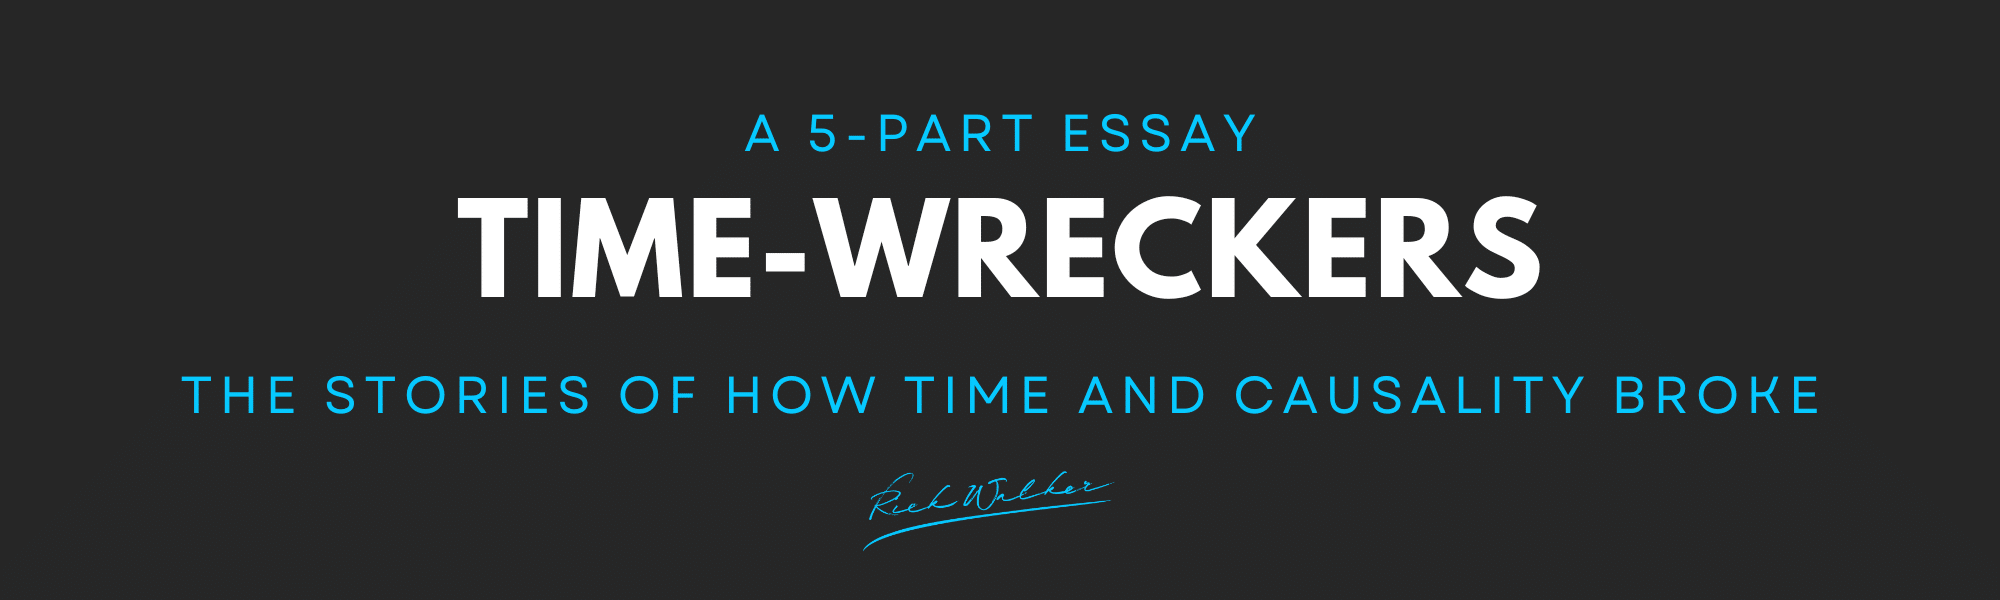 Time-wreckers is an essay series by Rick Walker about time and casuality